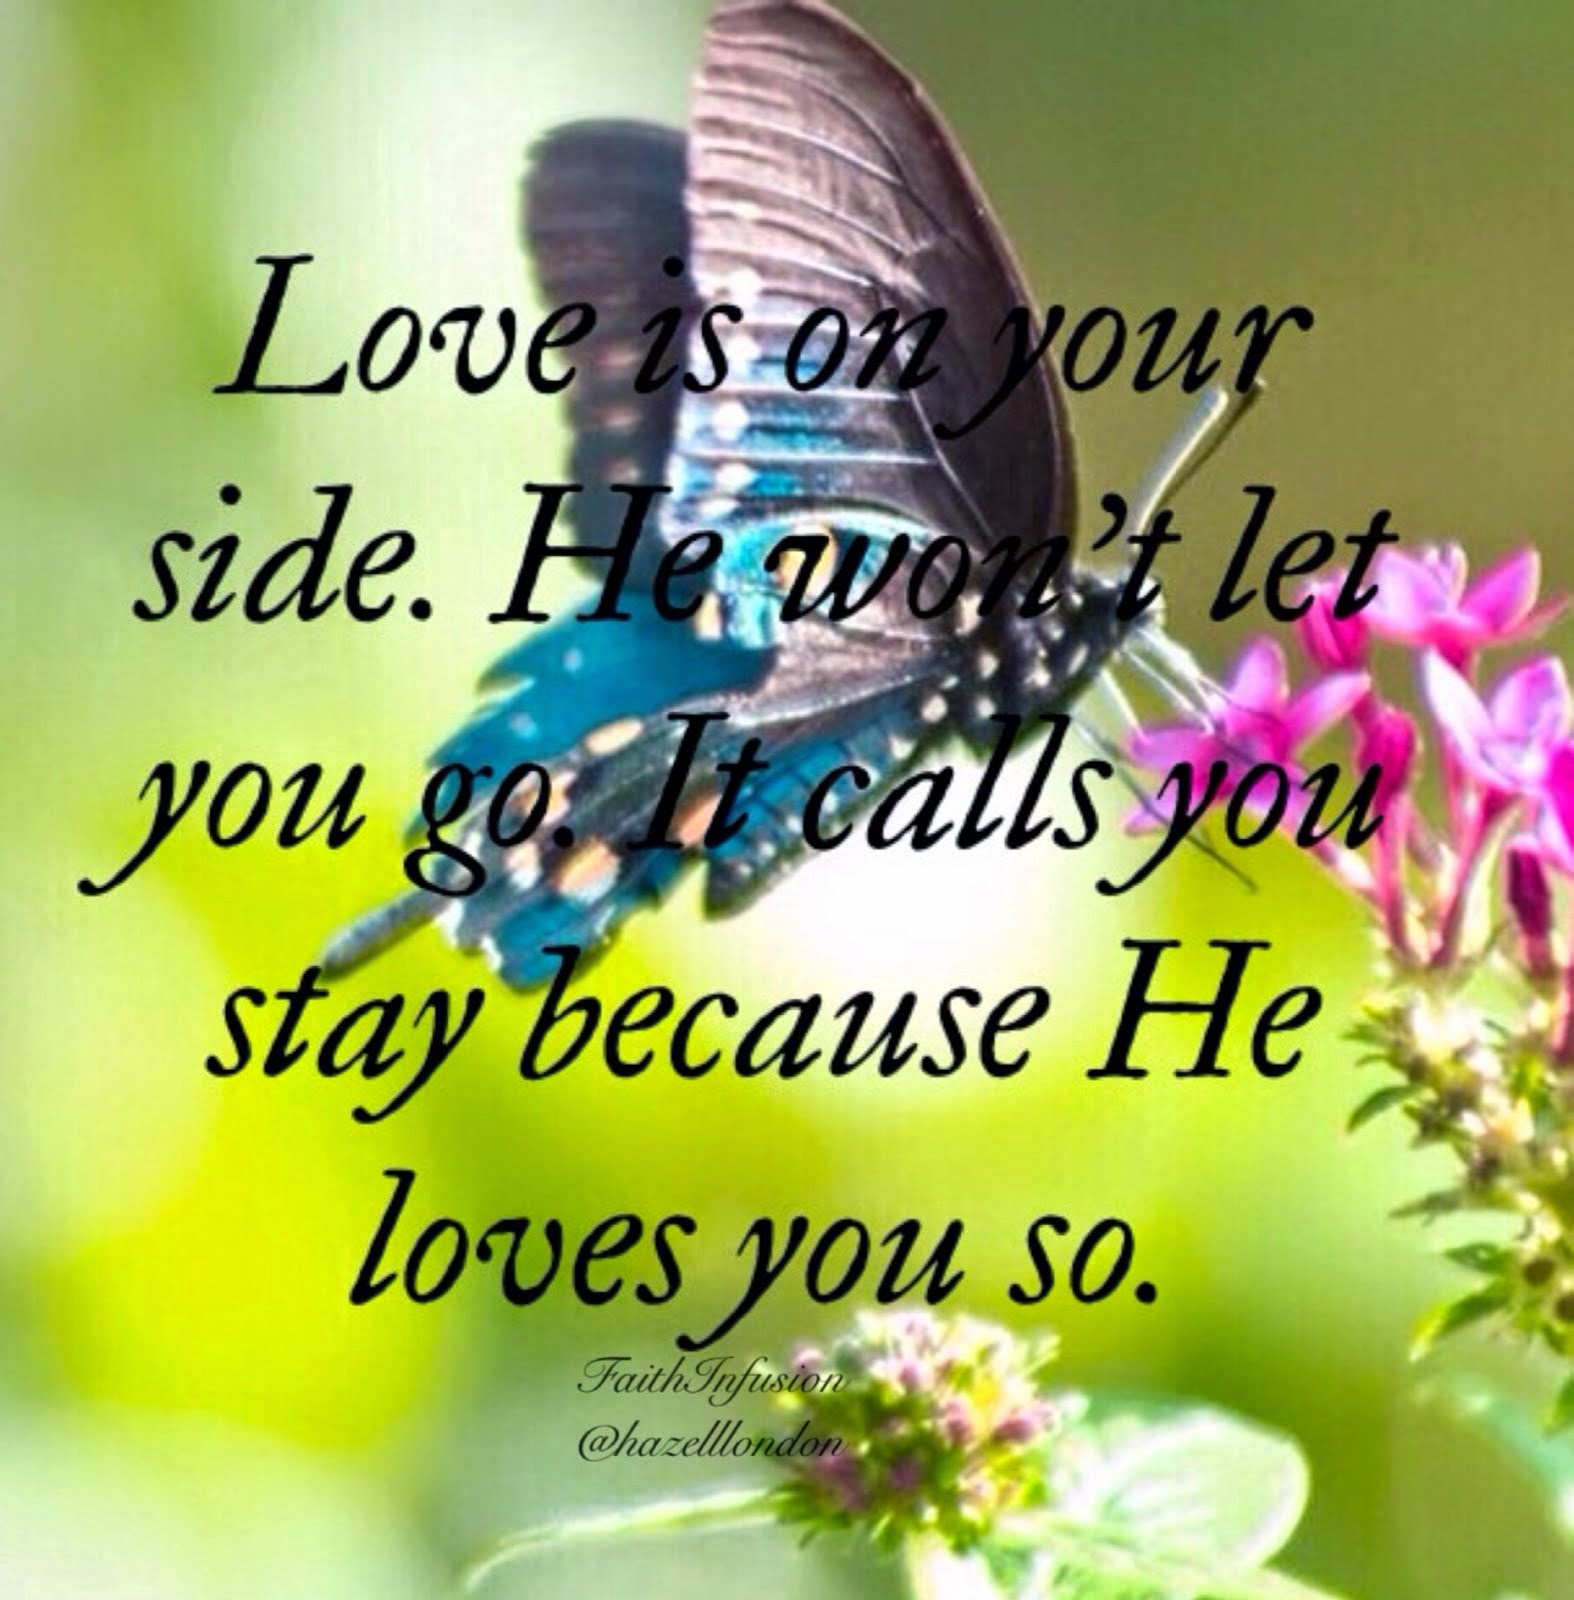 Love is on your side. He won't let you go. It calls you to stay because He loves you so.